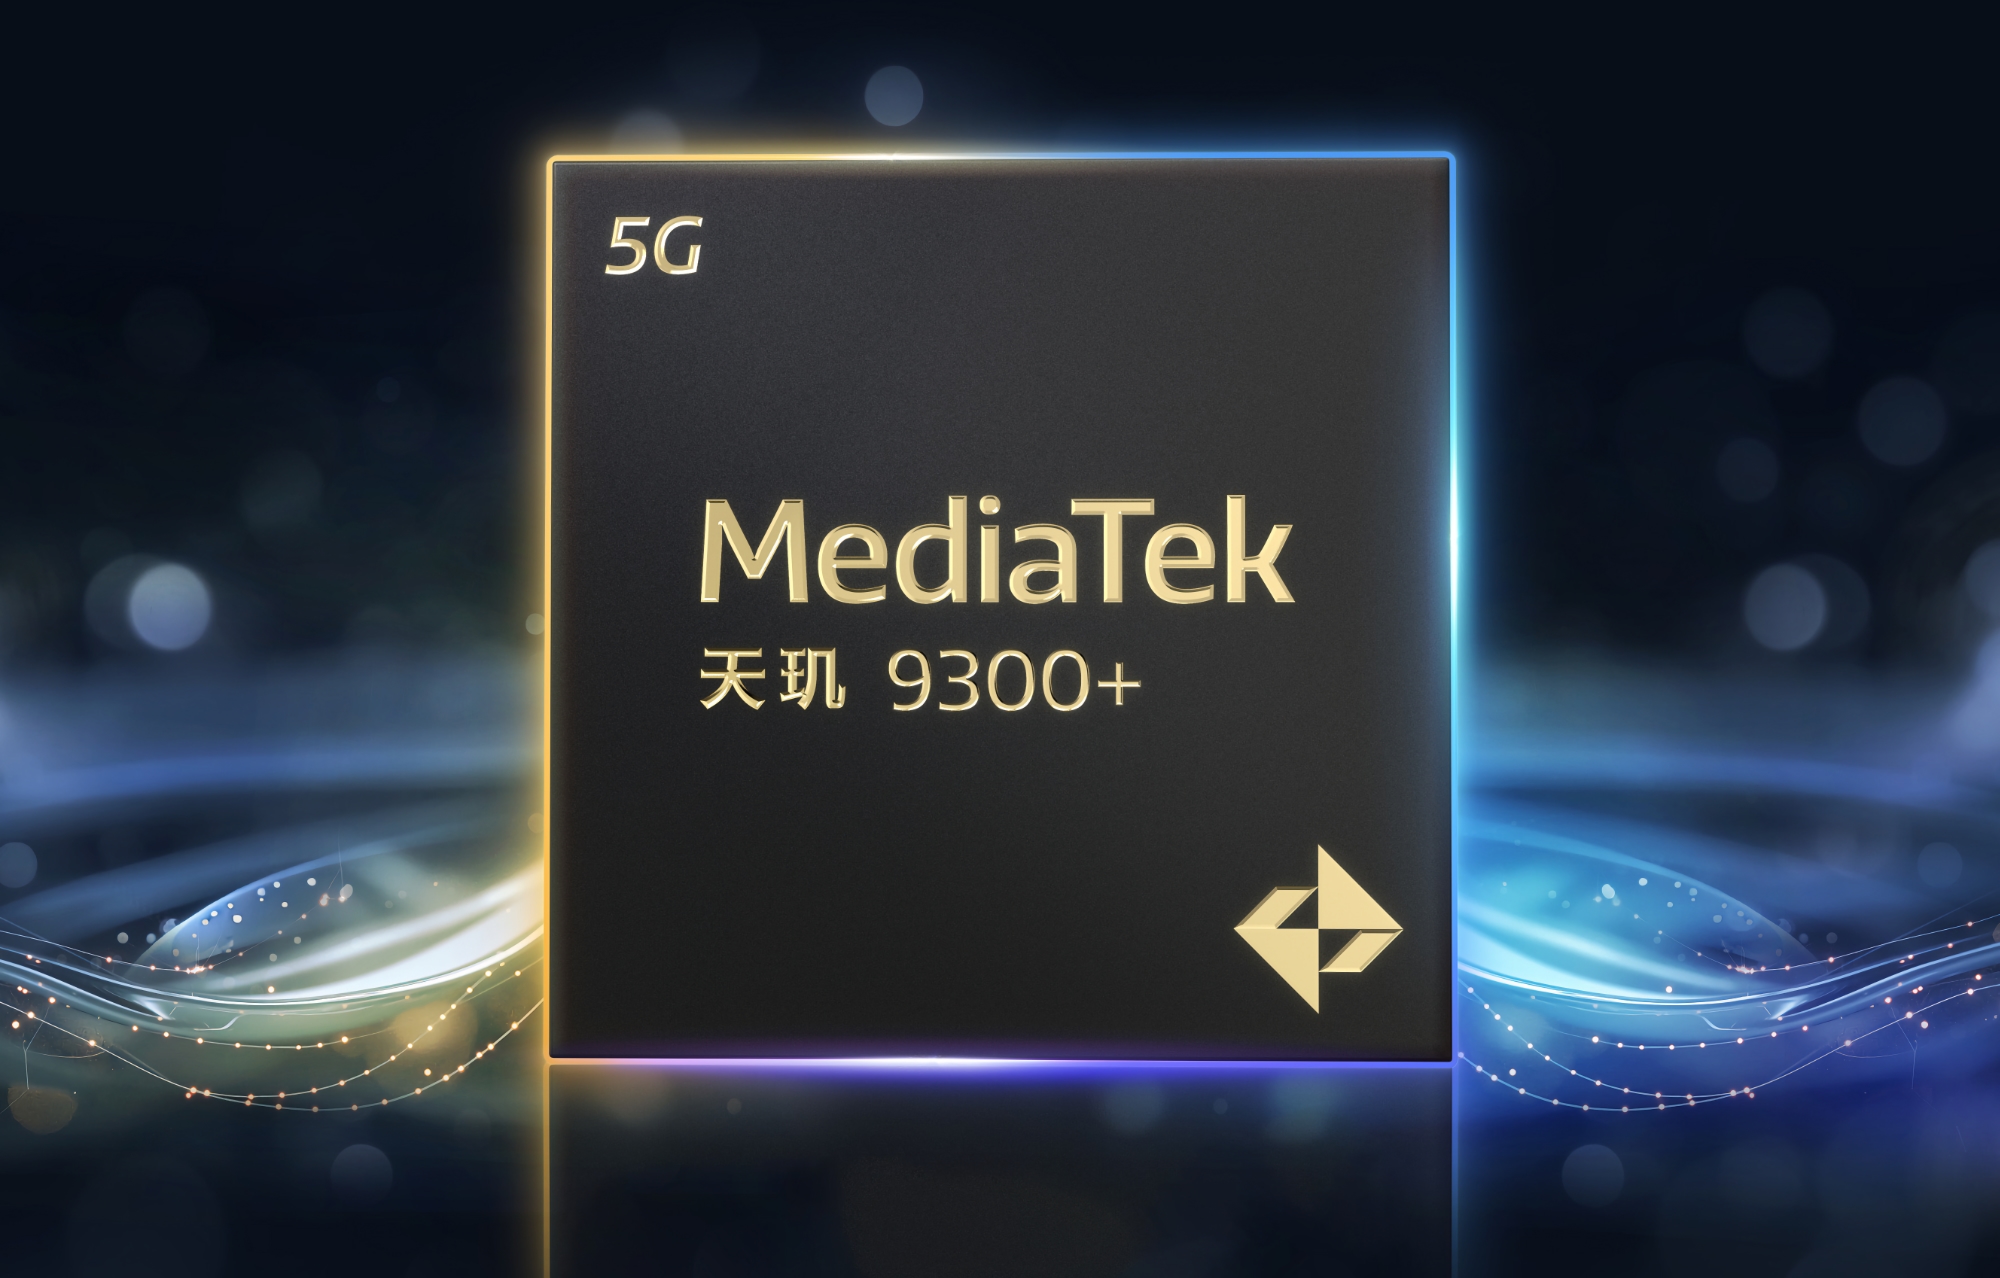 It's official: the MediaTek Dimensity 9300+ will debut on May 7